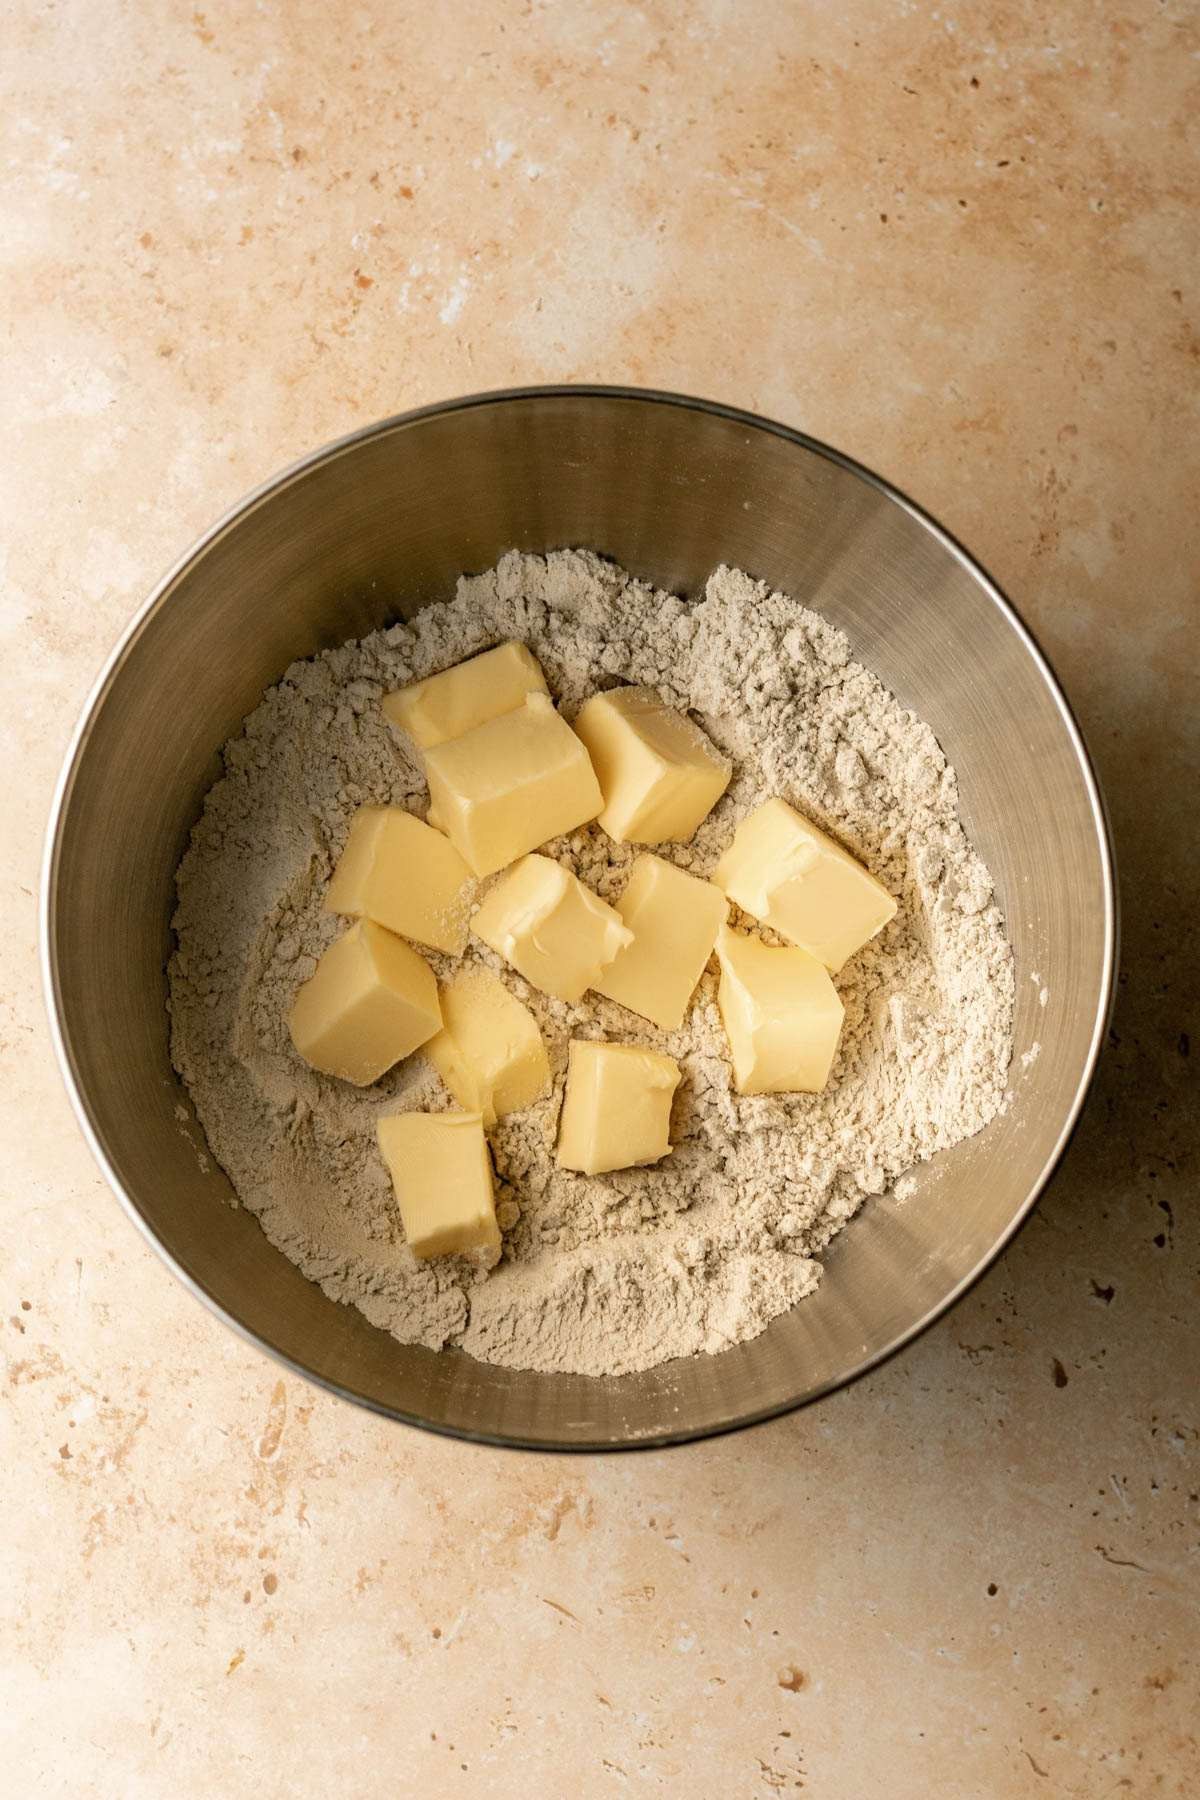 cubes of butter in a bowl of flour and millet flour